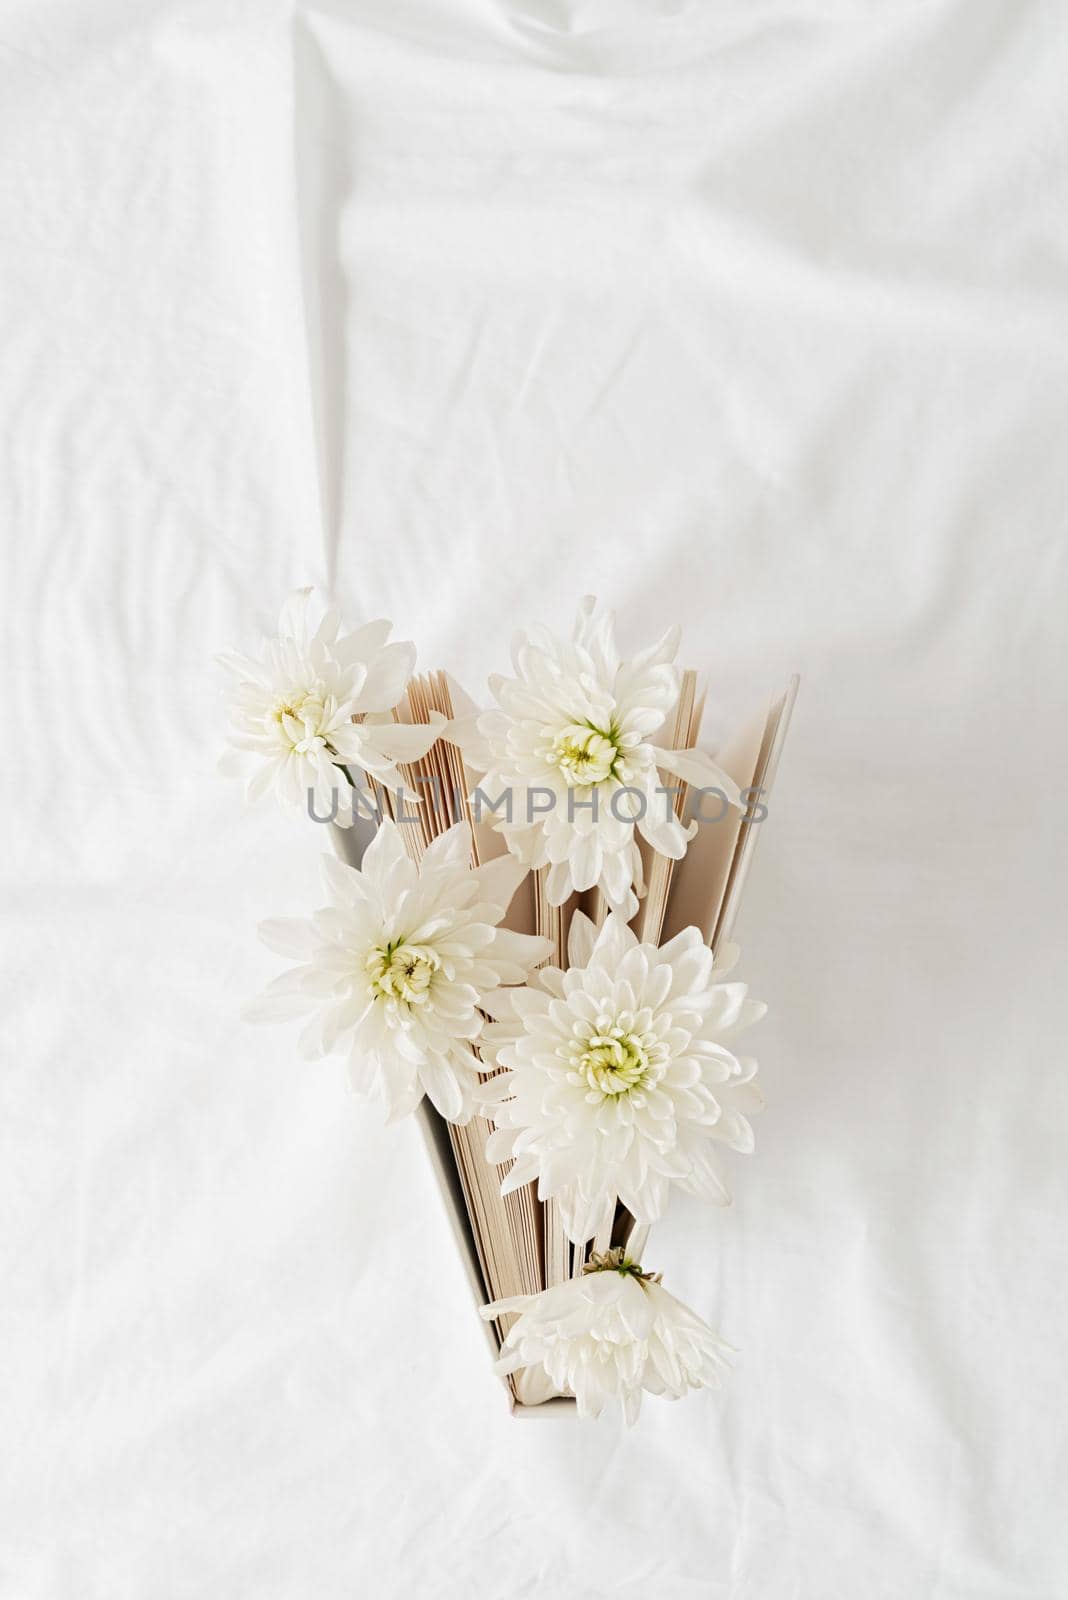 Spring reading concept. Top view of a book with white chrysanthemum flowers on white background. Flat lay